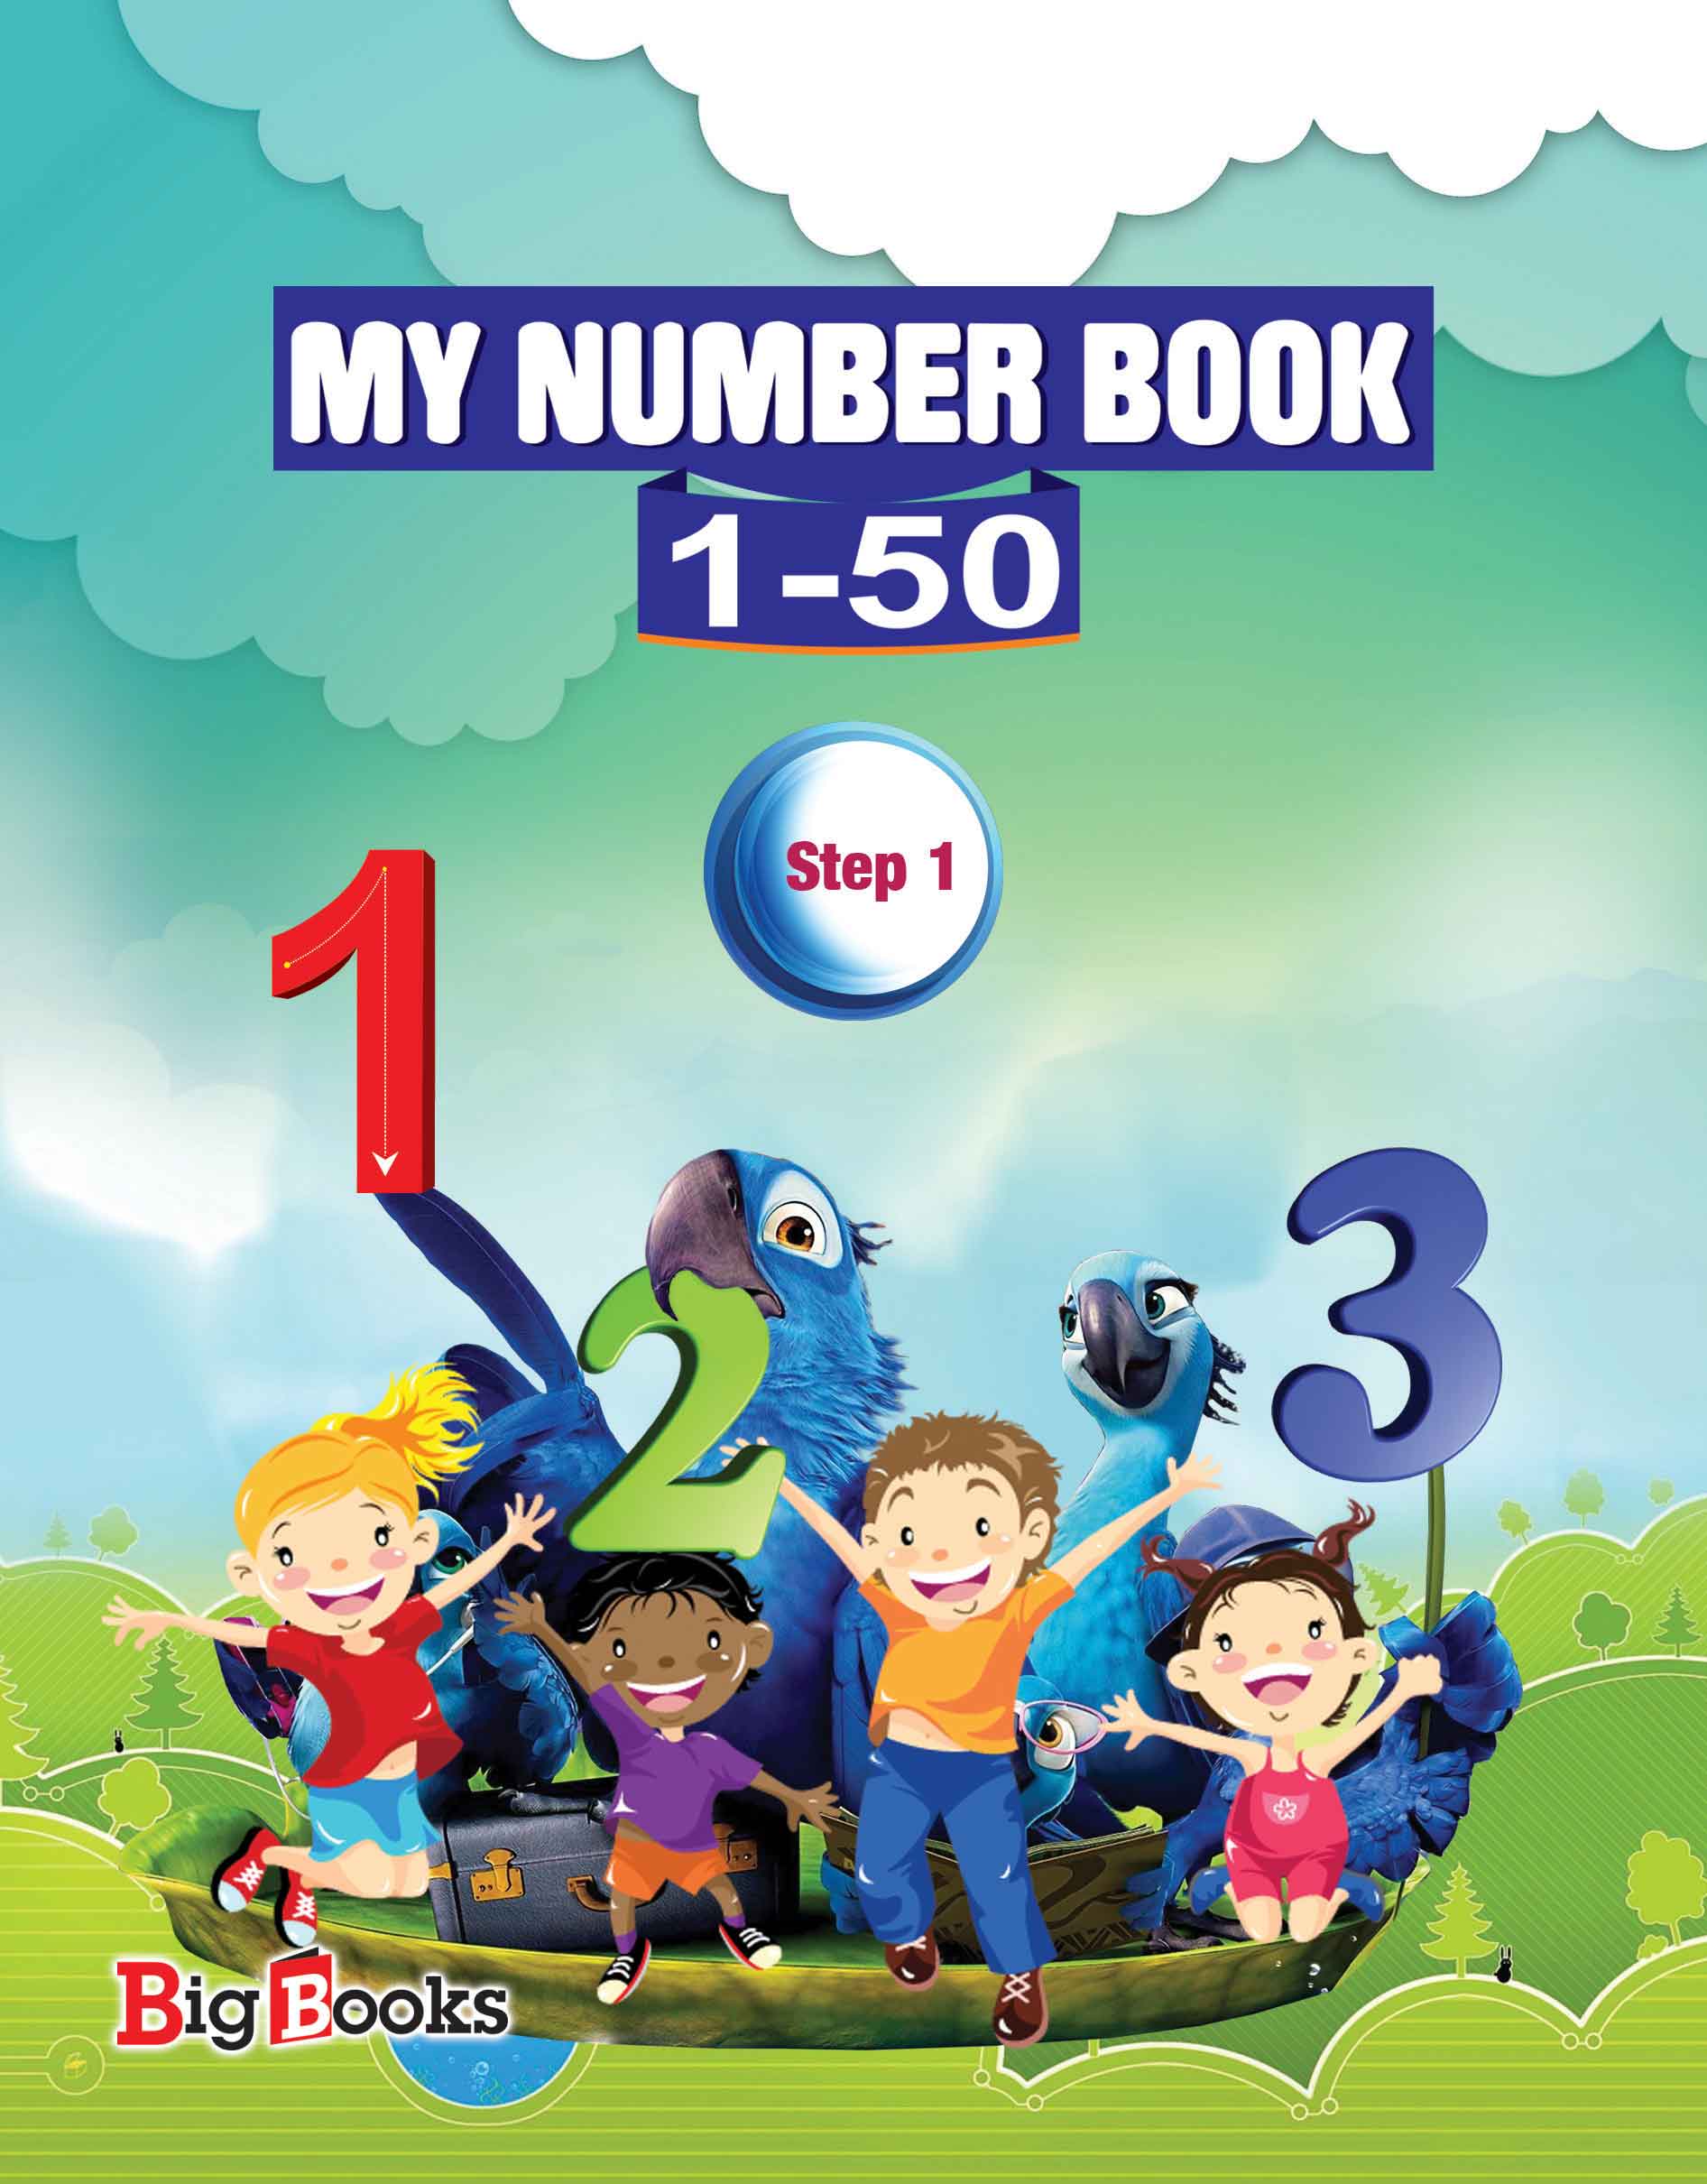 Buy English Number Book online